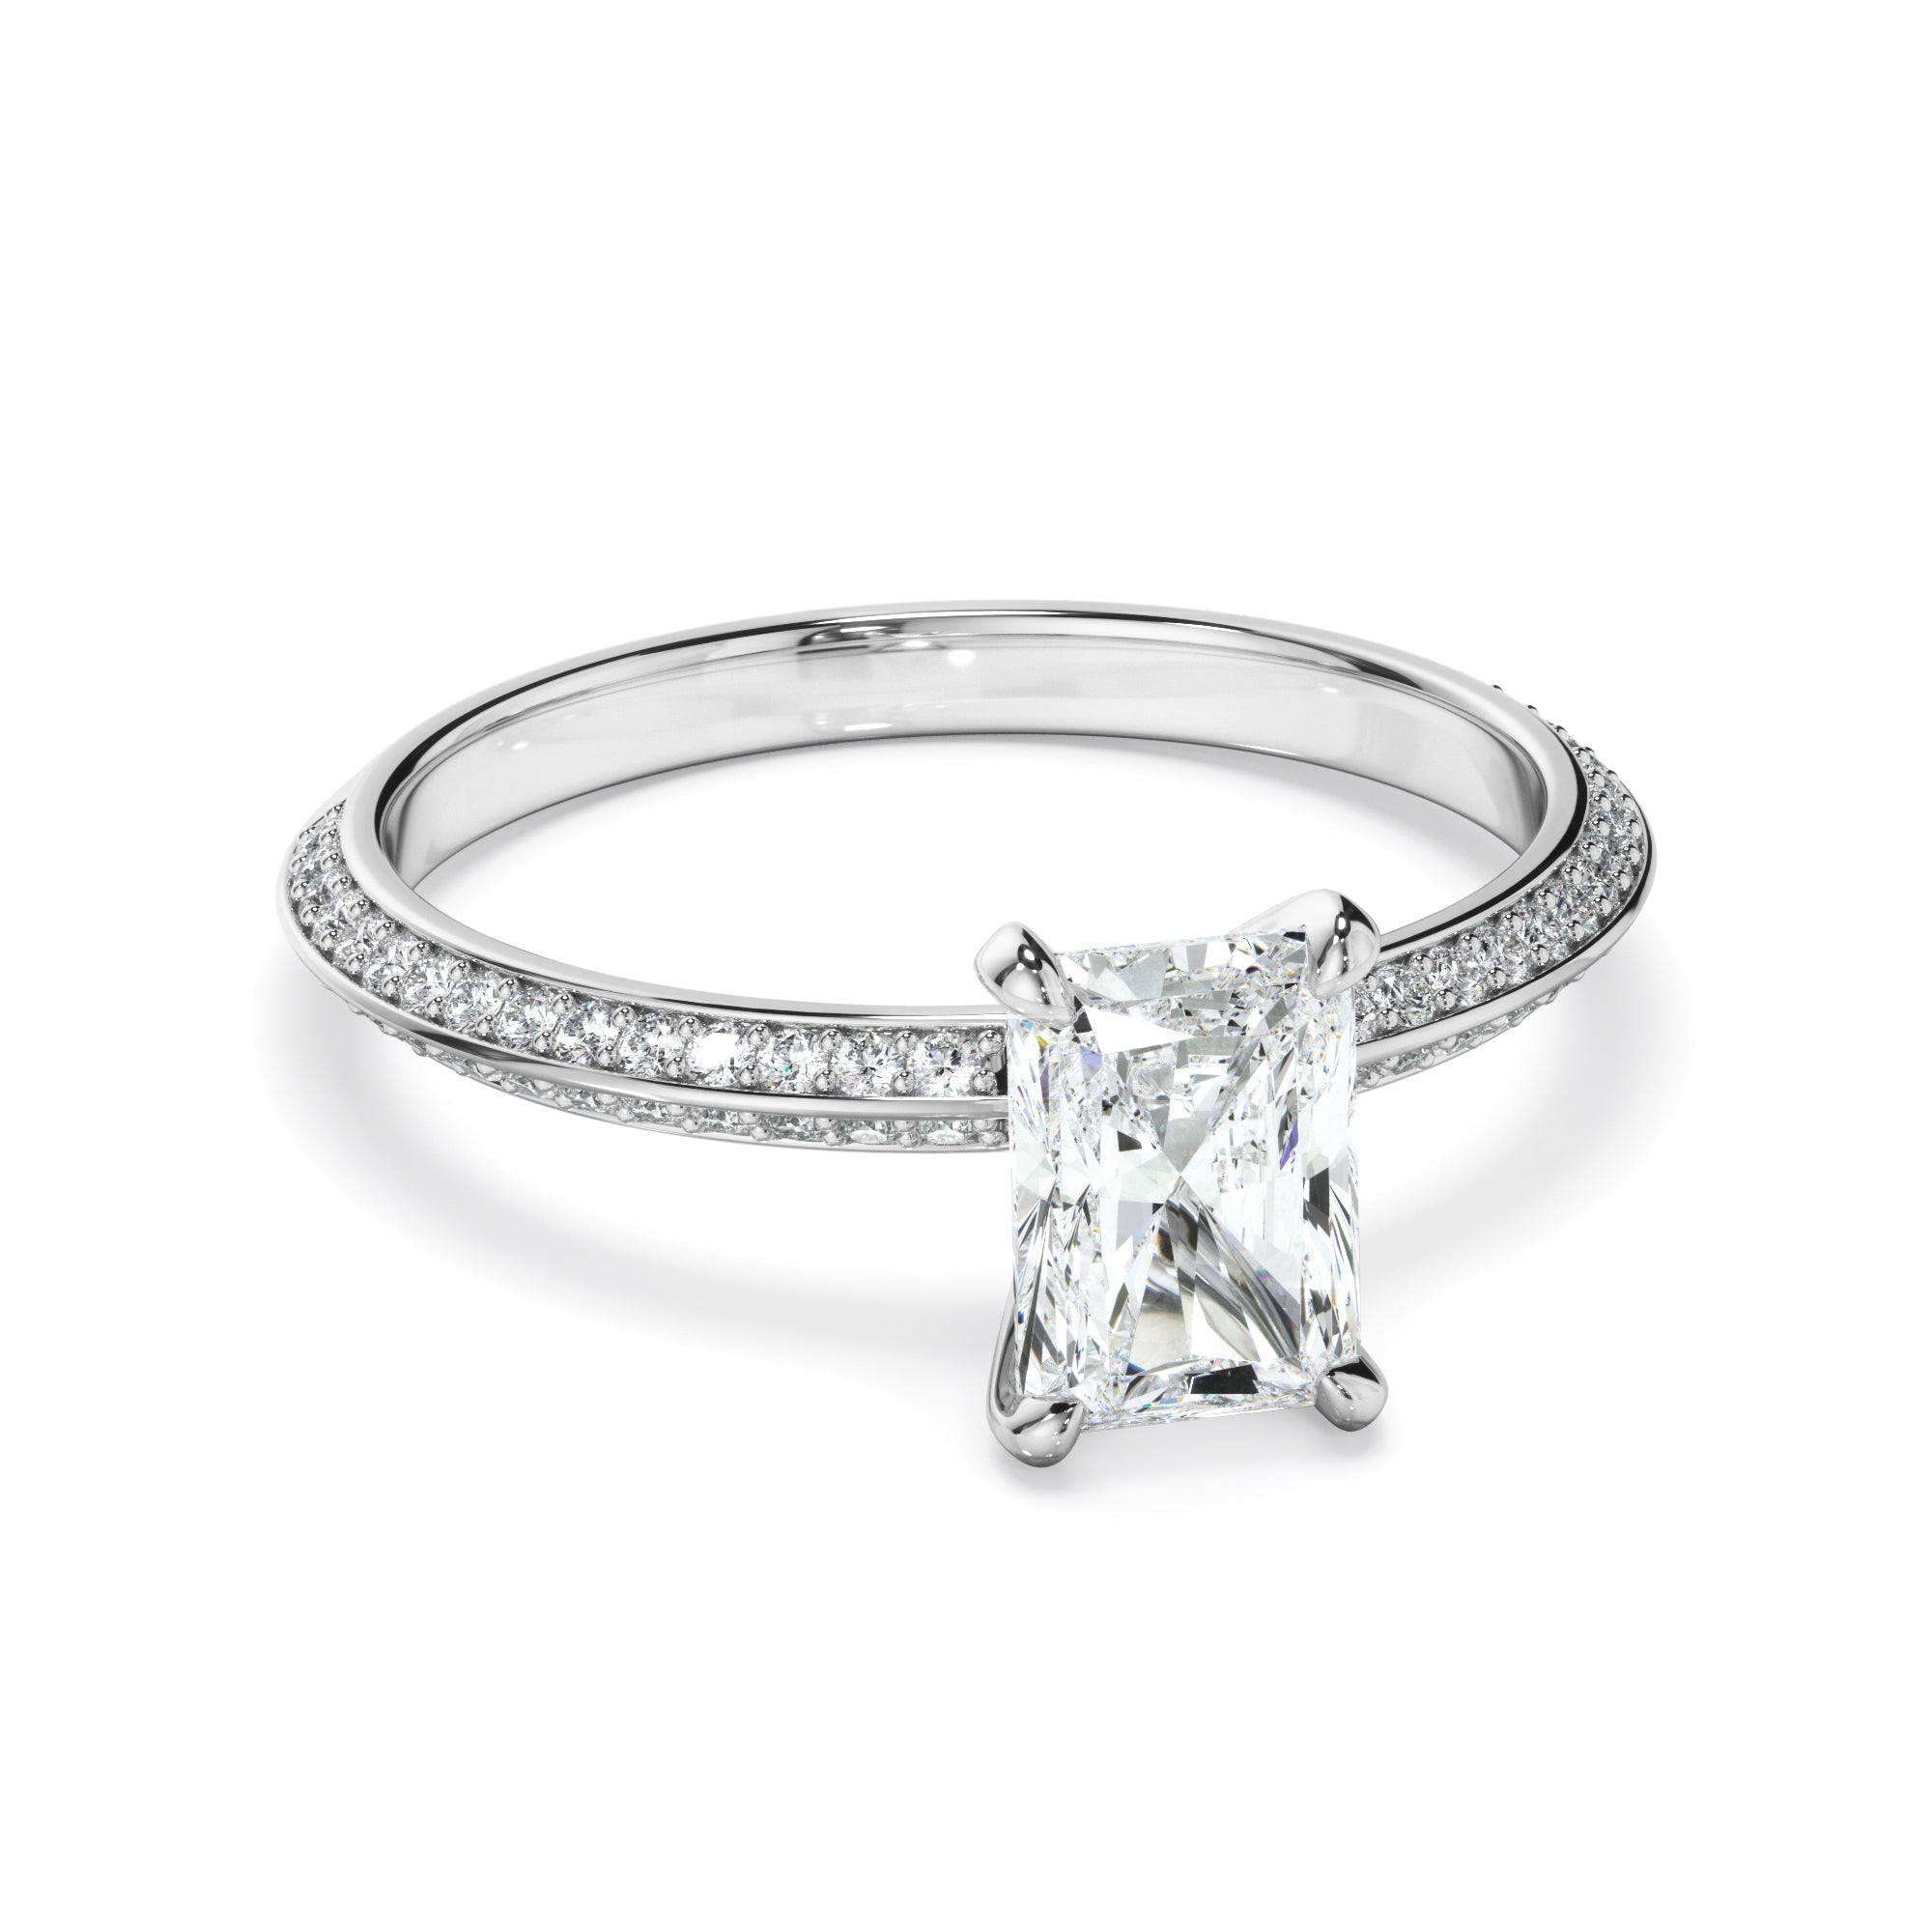 Radiant Cut Diamond Knife Edge Engagement Ring With Diamond Pave Sides